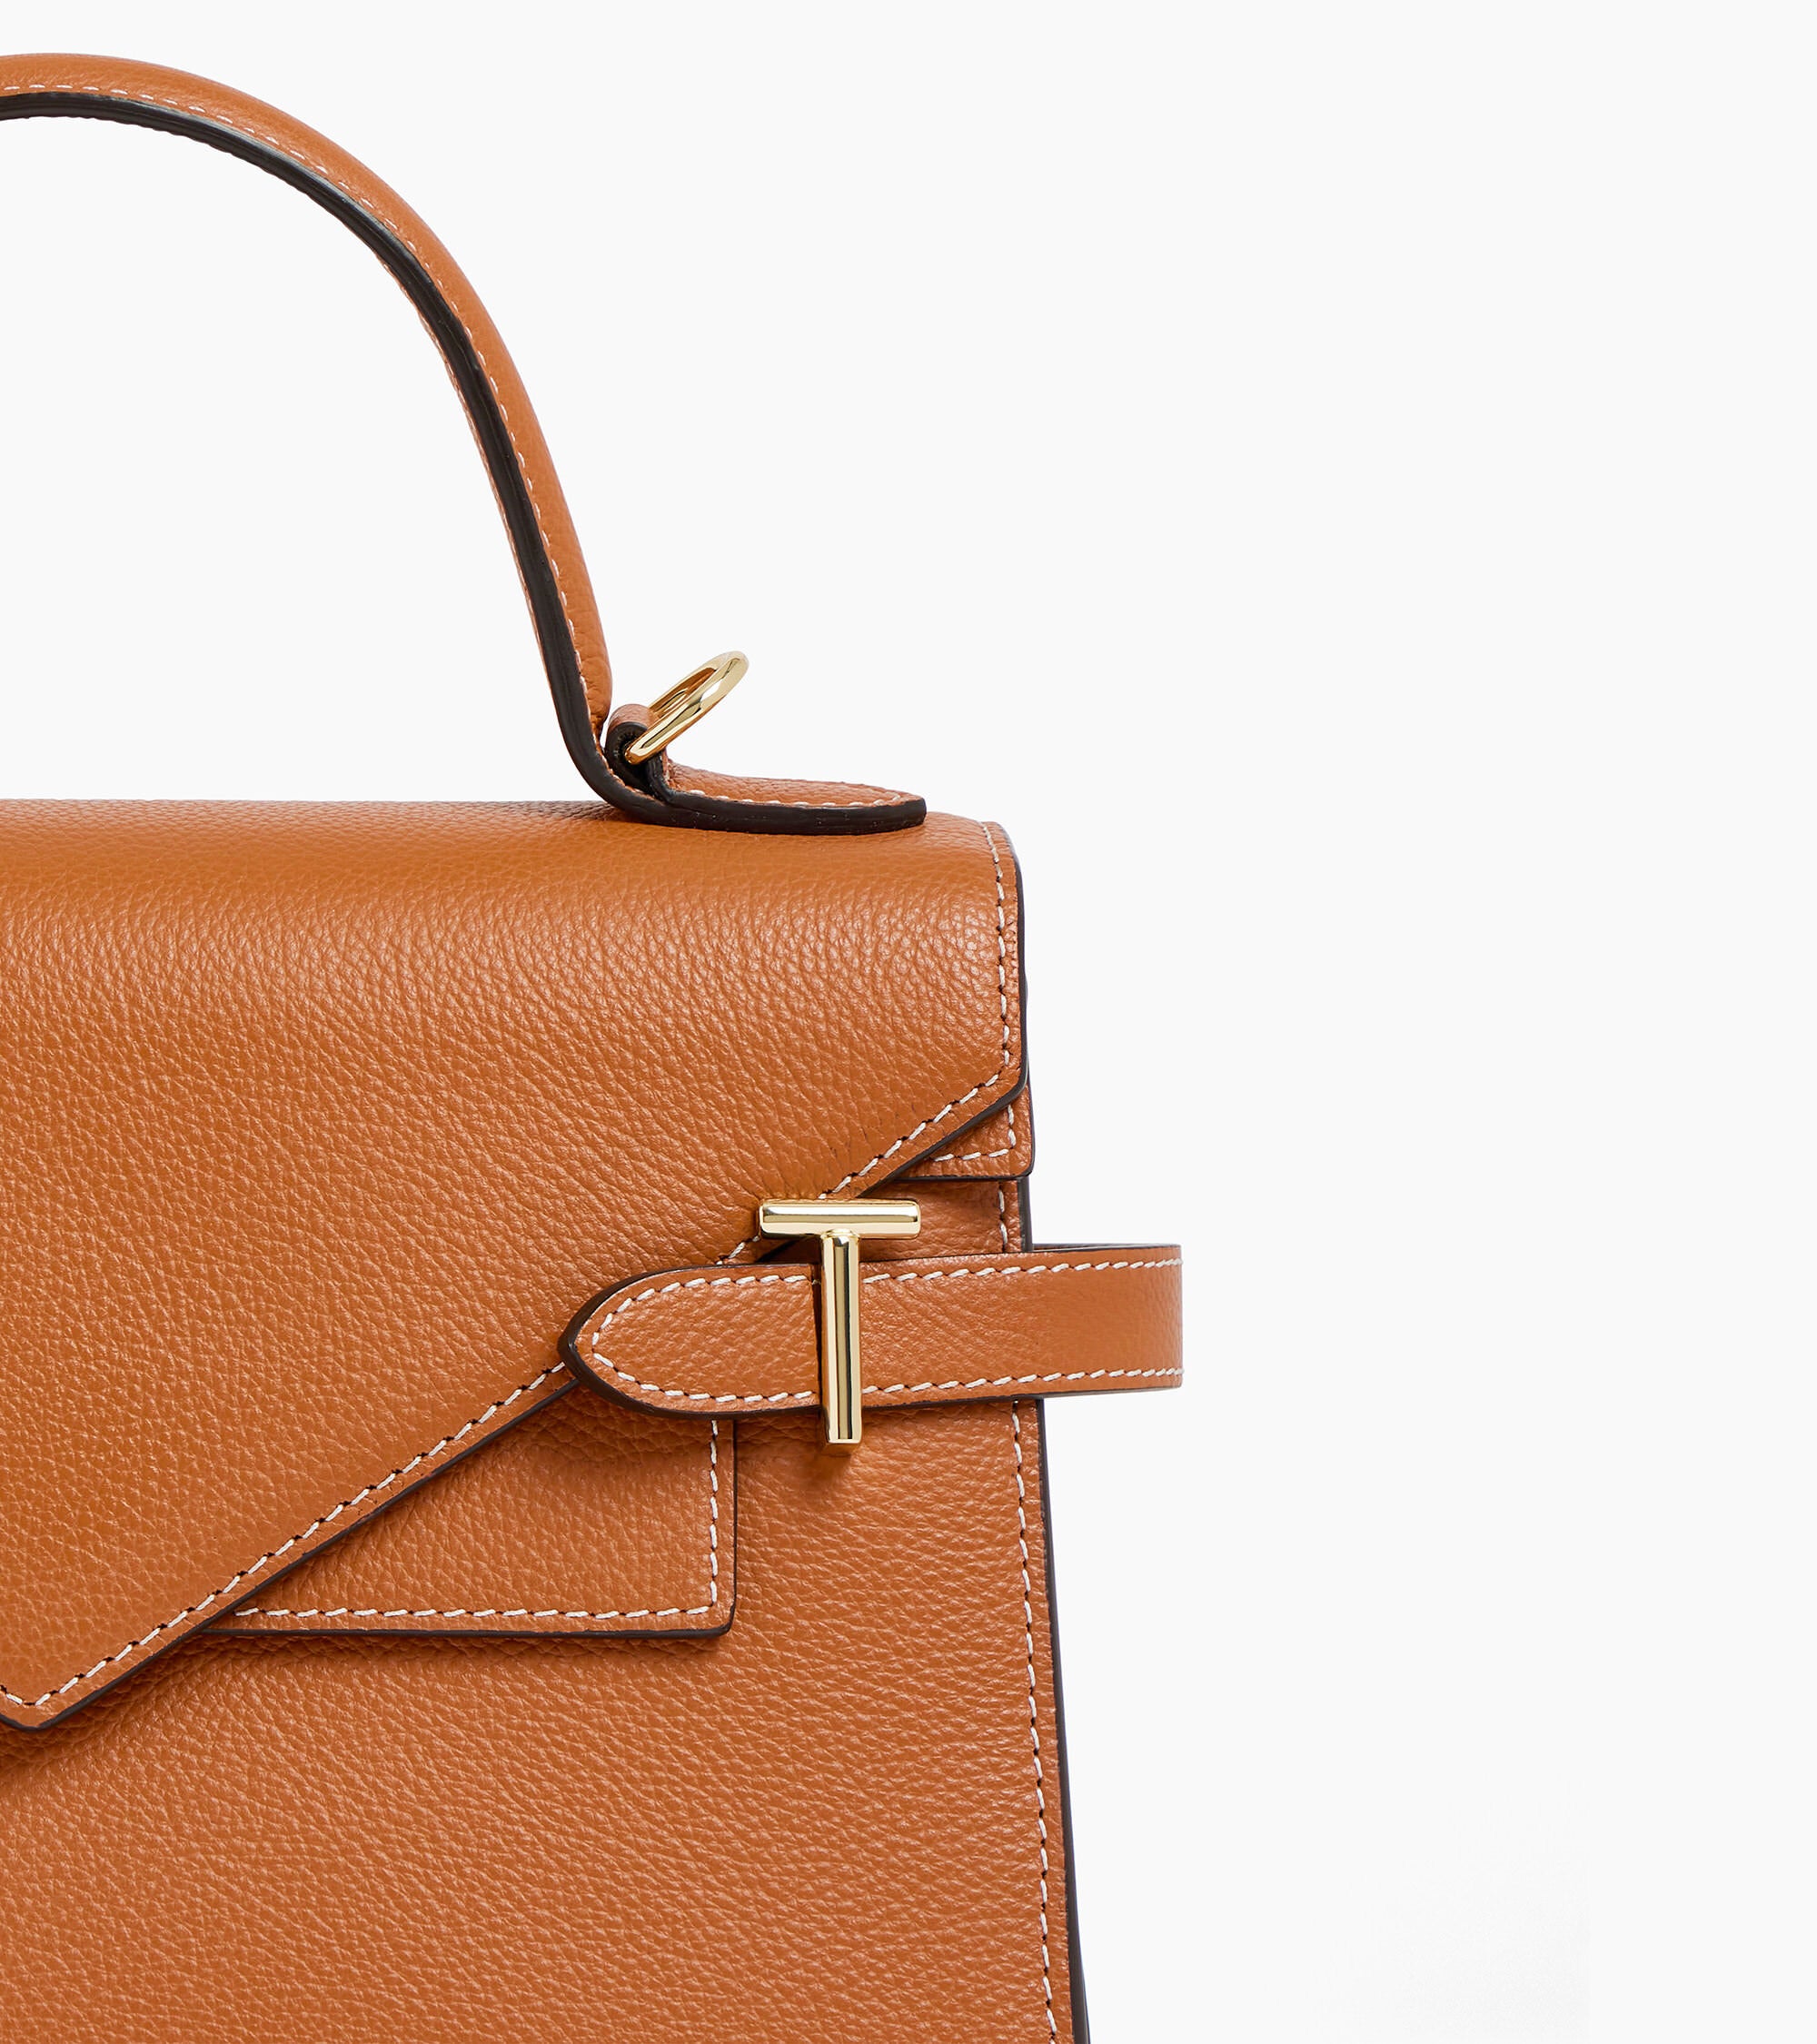 Emilie collection, bags and small leather goods - Le Tanneur